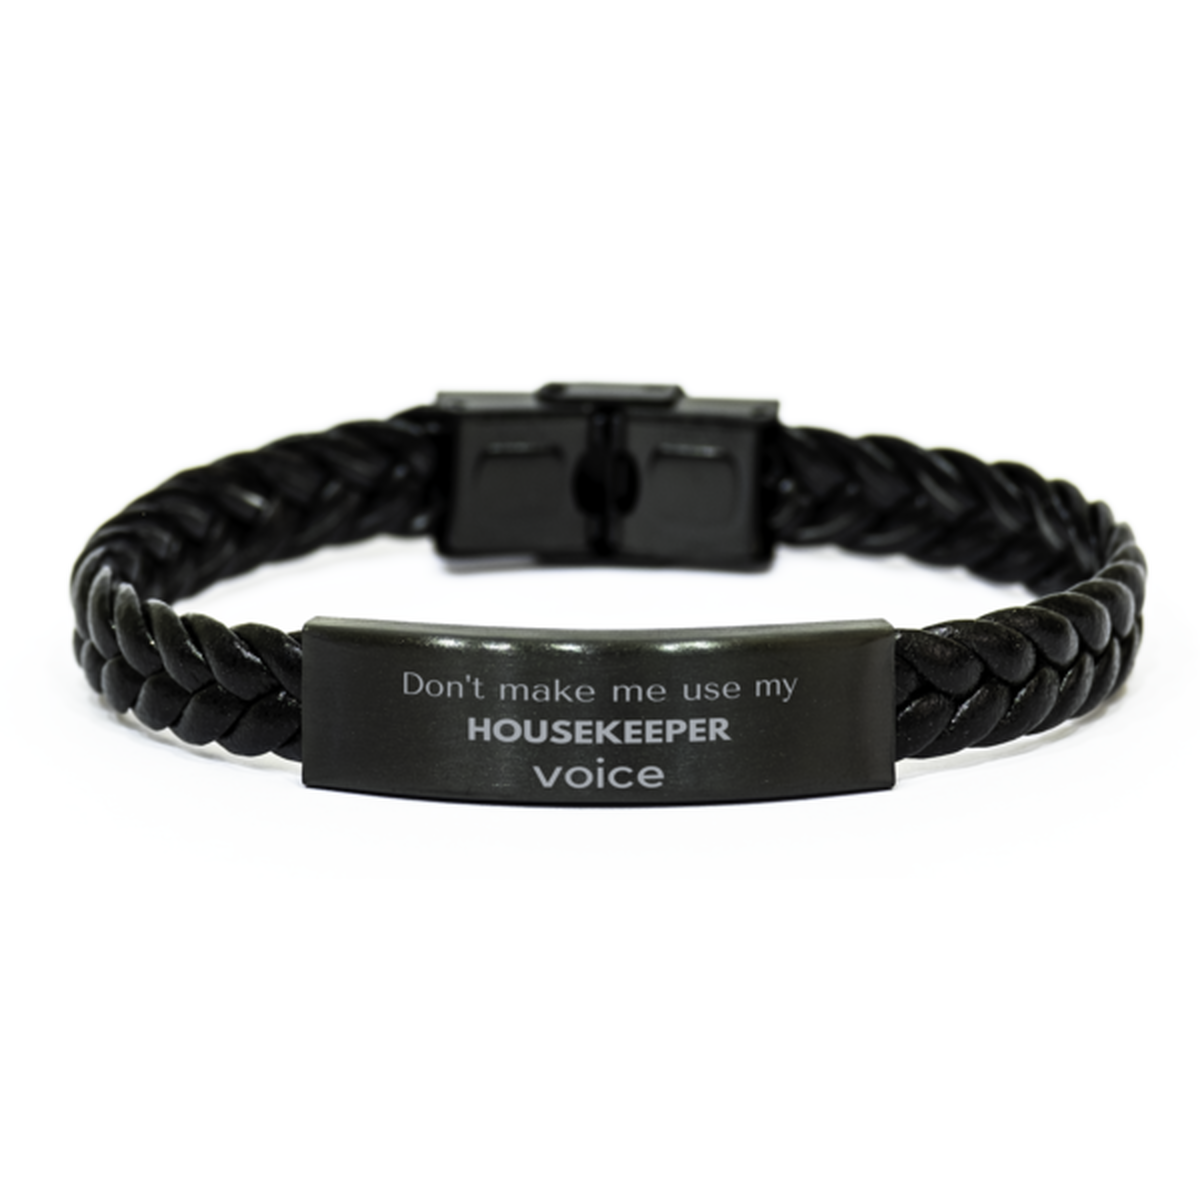 Don't make me use my Housekeeper voice, Sarcasm Housekeeper Gifts, Christmas Housekeeper Braided Leather Bracelet Birthday Unique Gifts For Housekeeper Coworkers, Men, Women, Colleague, Friends